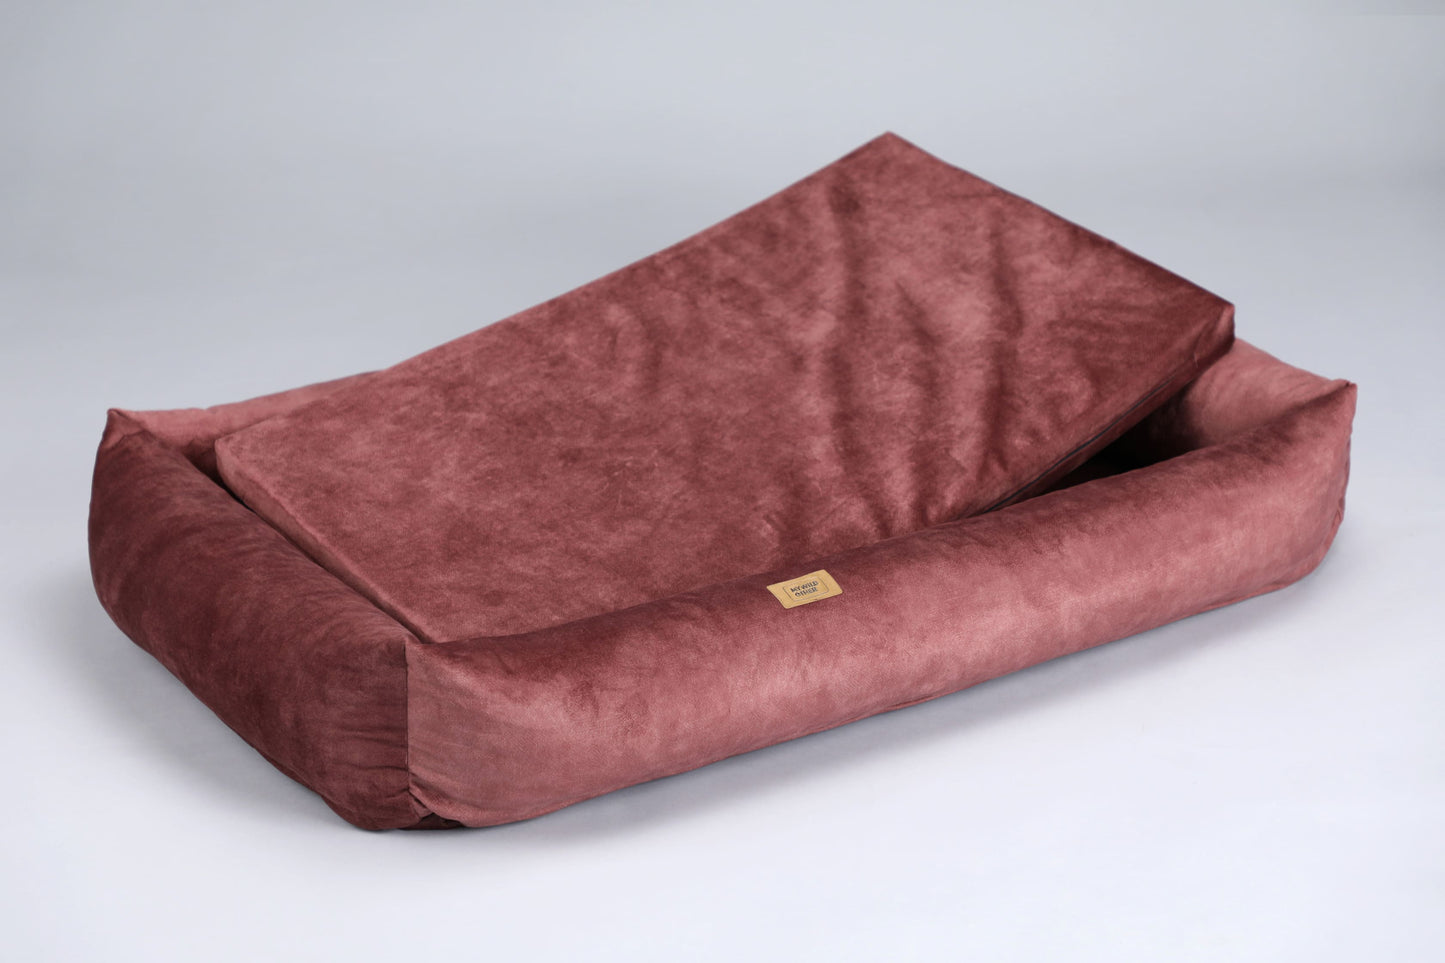 2-sided classic dog bed. TERRACOTTA - European handmade dog accessories by My Wild Other